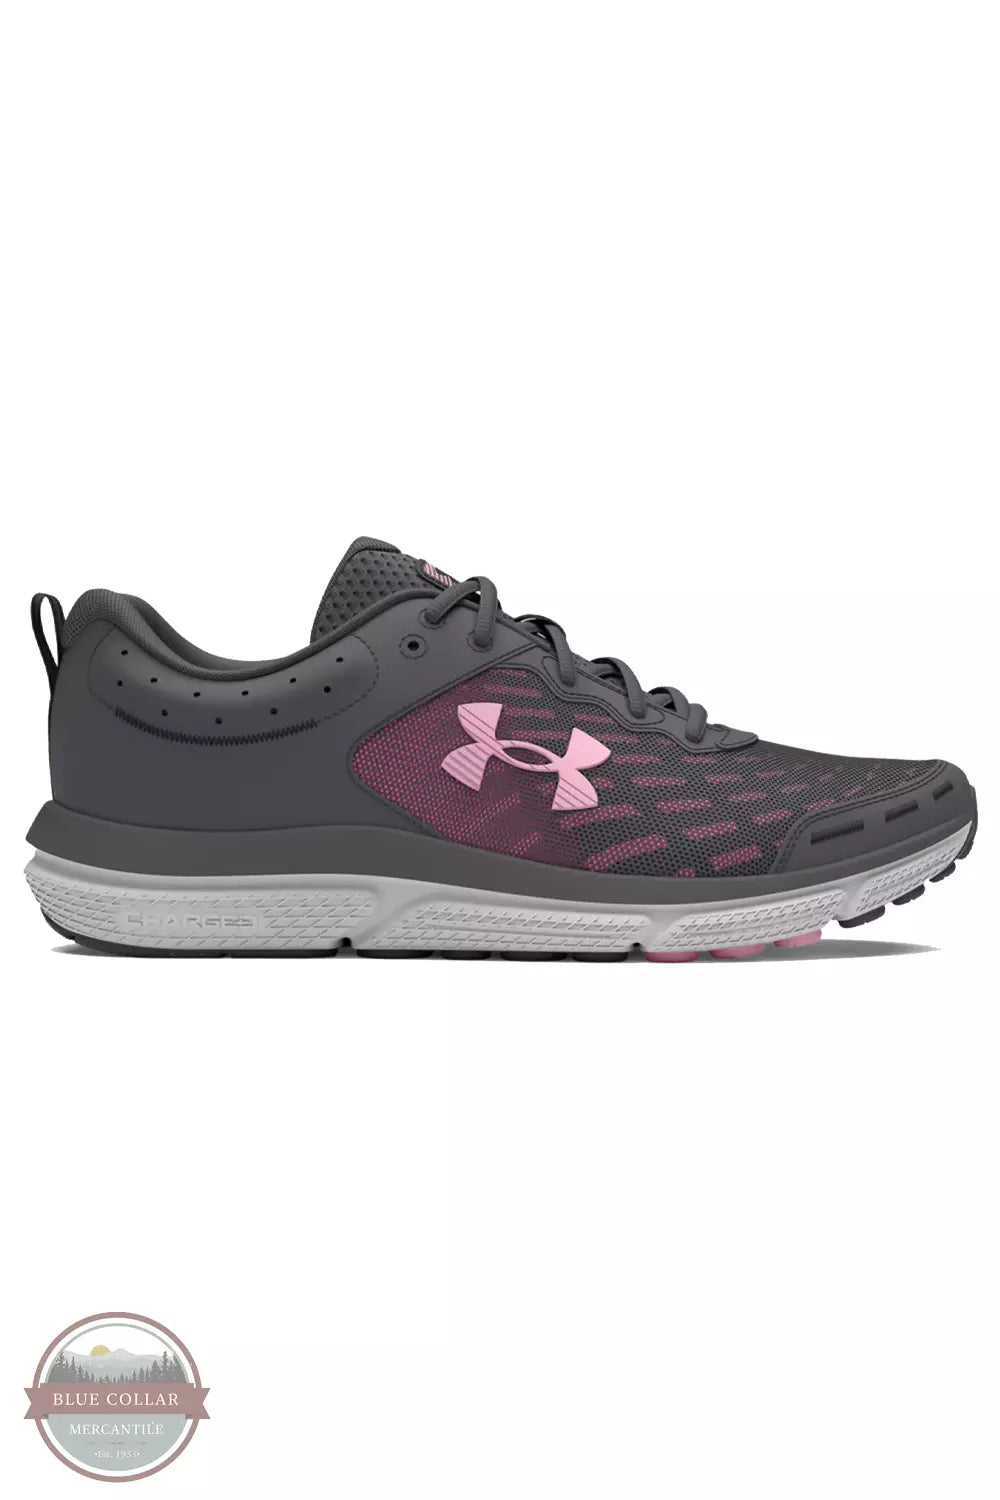 Under Armour 3026179 Charged Asset 10 Running Shoes Side View